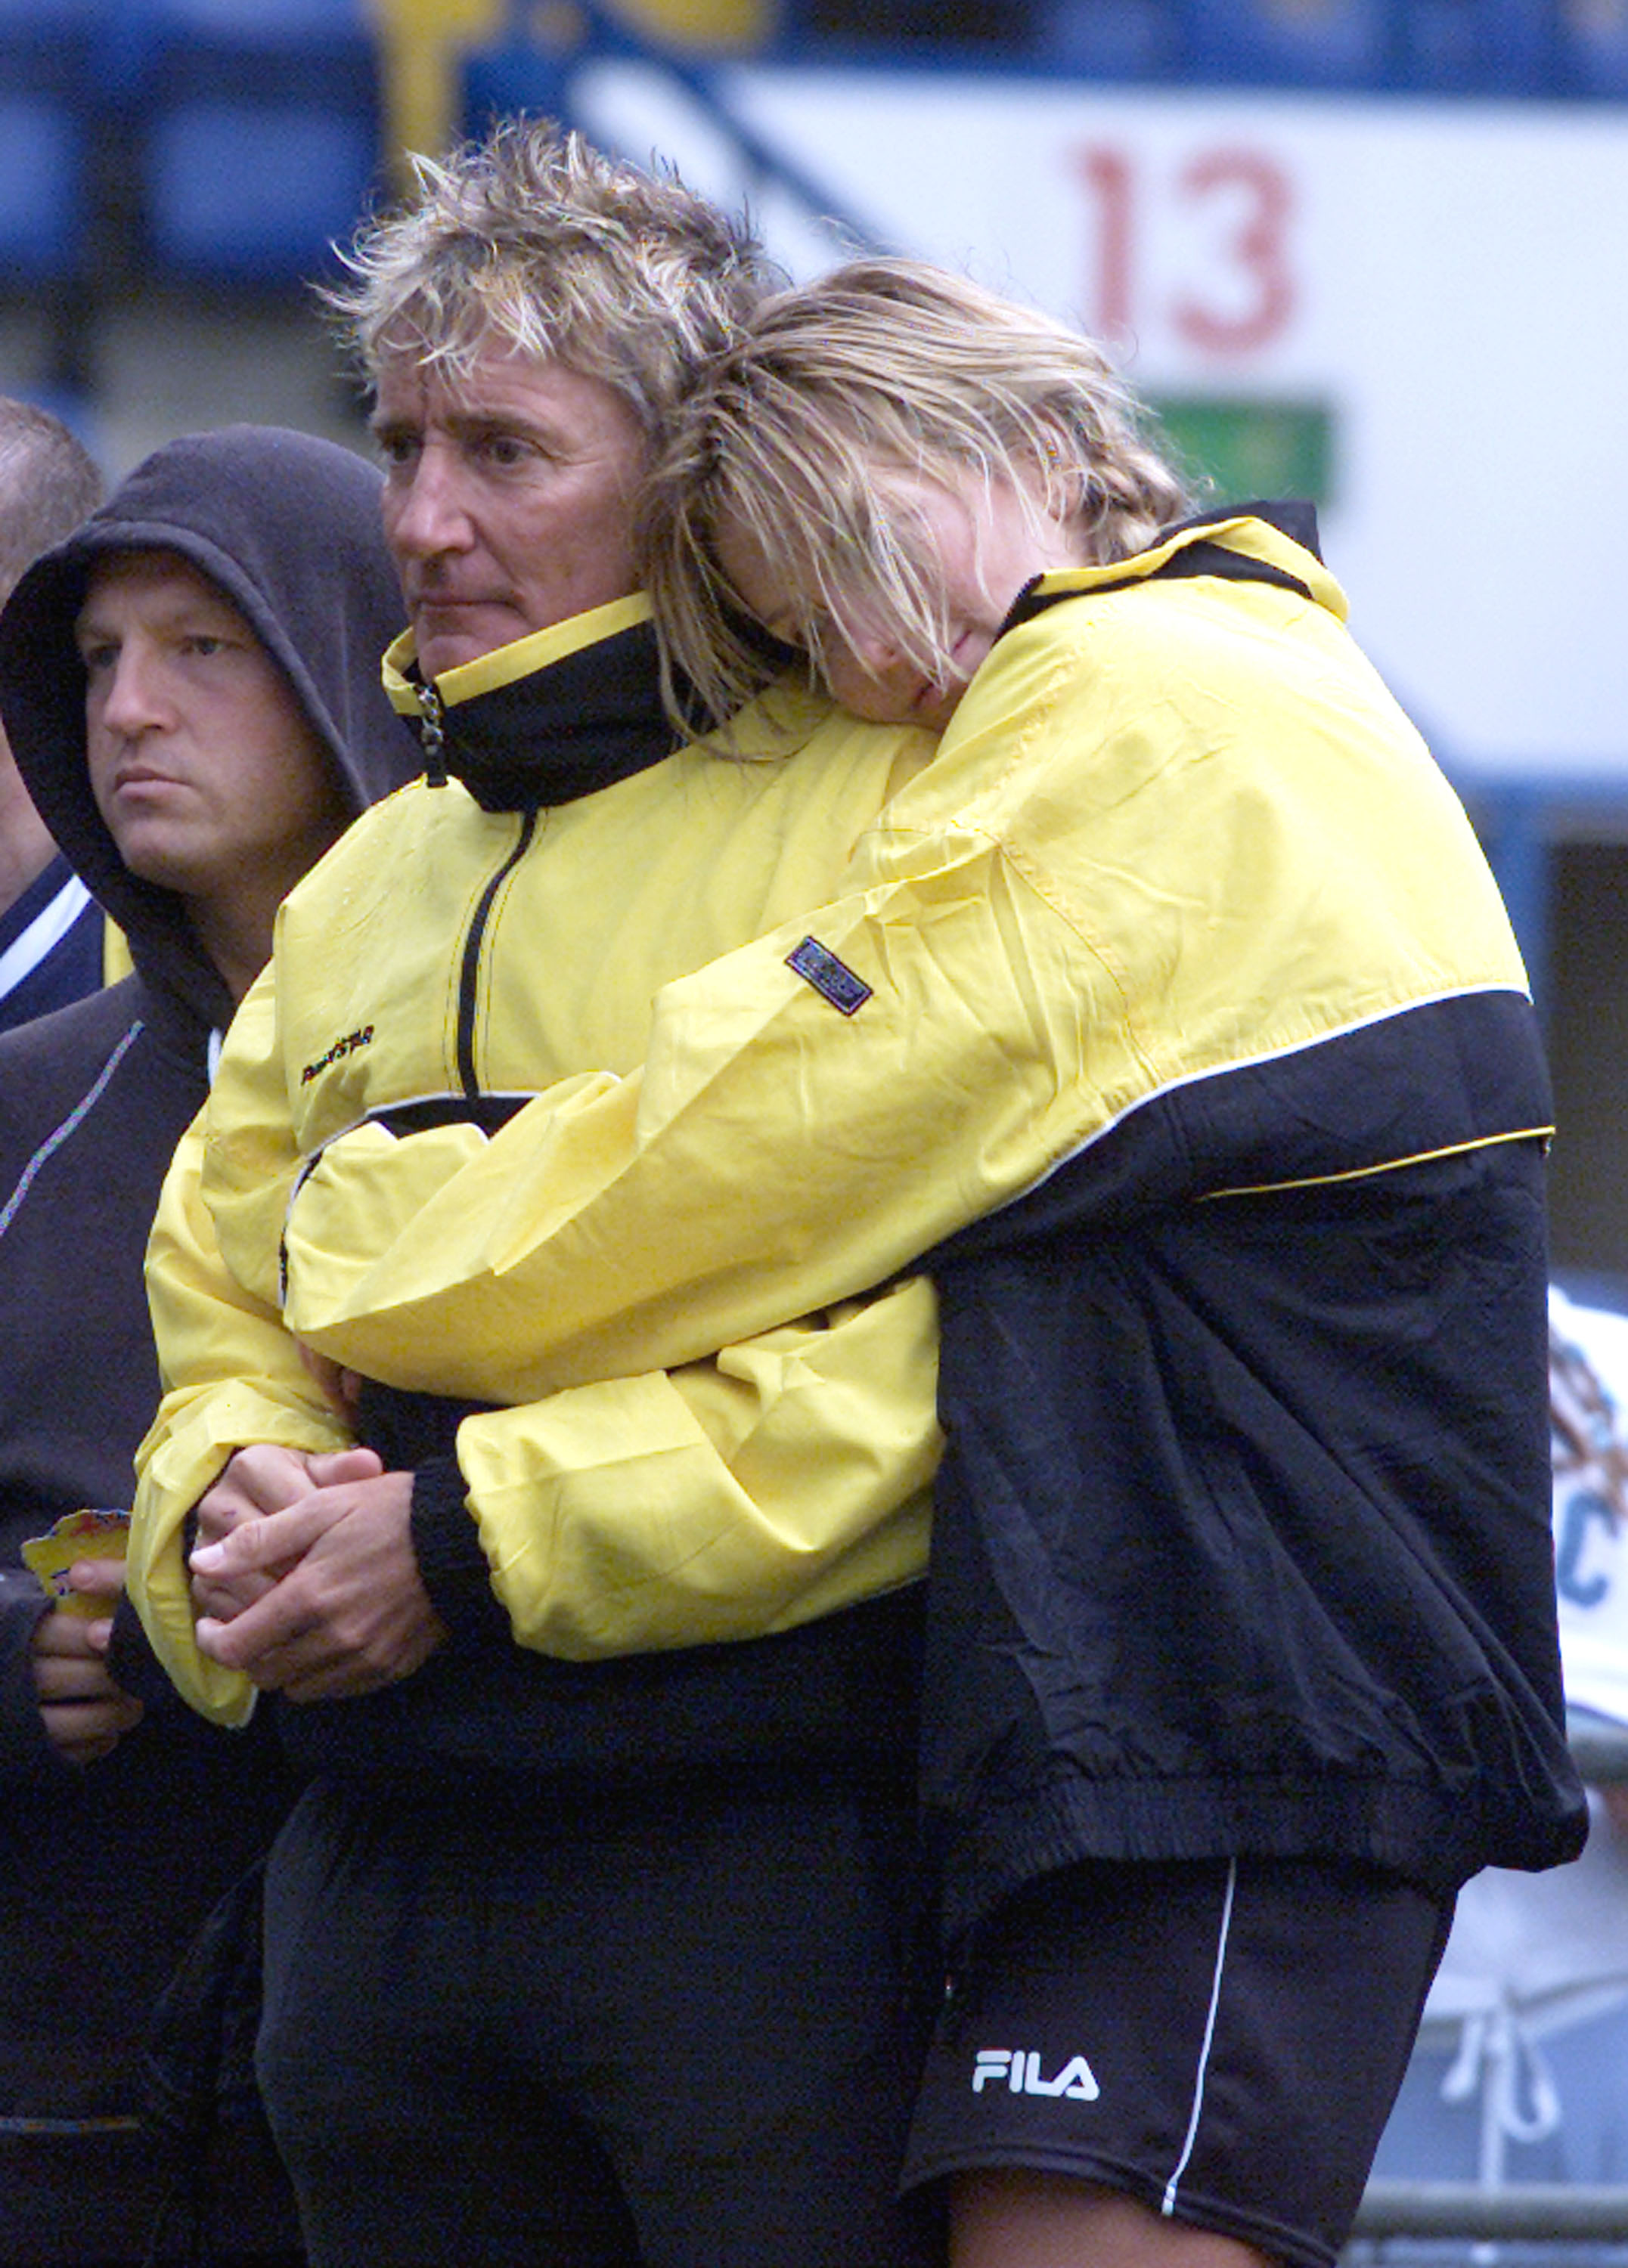 Sir Rod Stewart and Penny Lancaster in Stamford Bridge, London on May 26, 2002 | Source: Getty Images